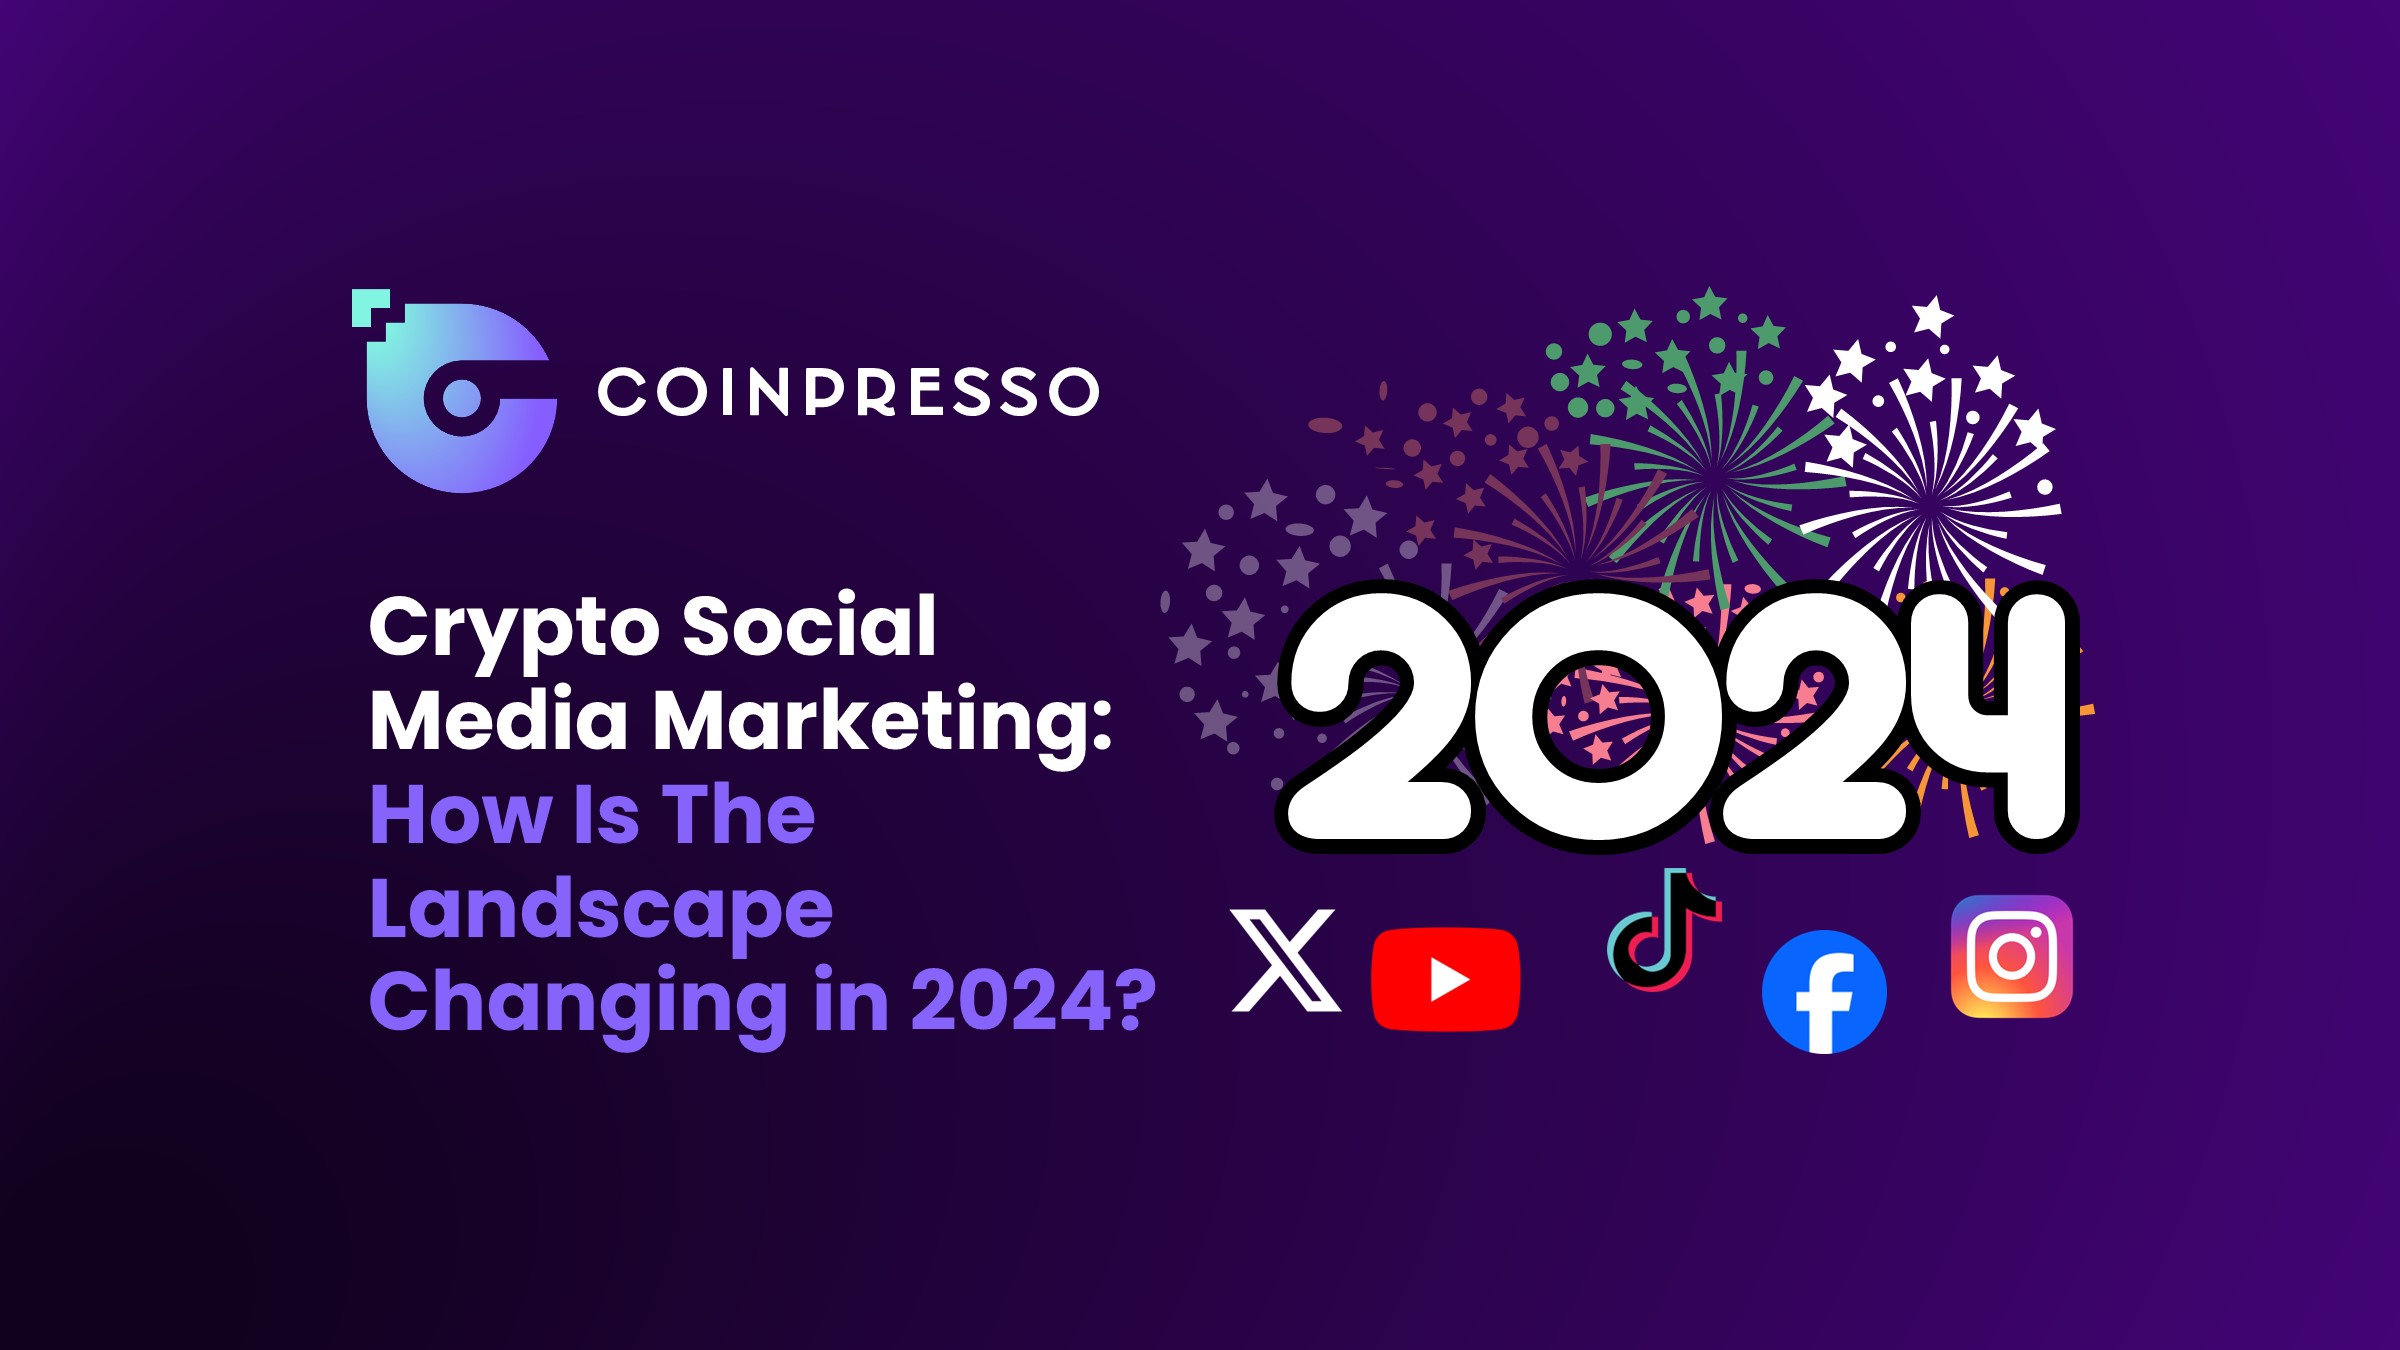 Crypto Social Media Marketing: How Is The Landscape Changing in 2024